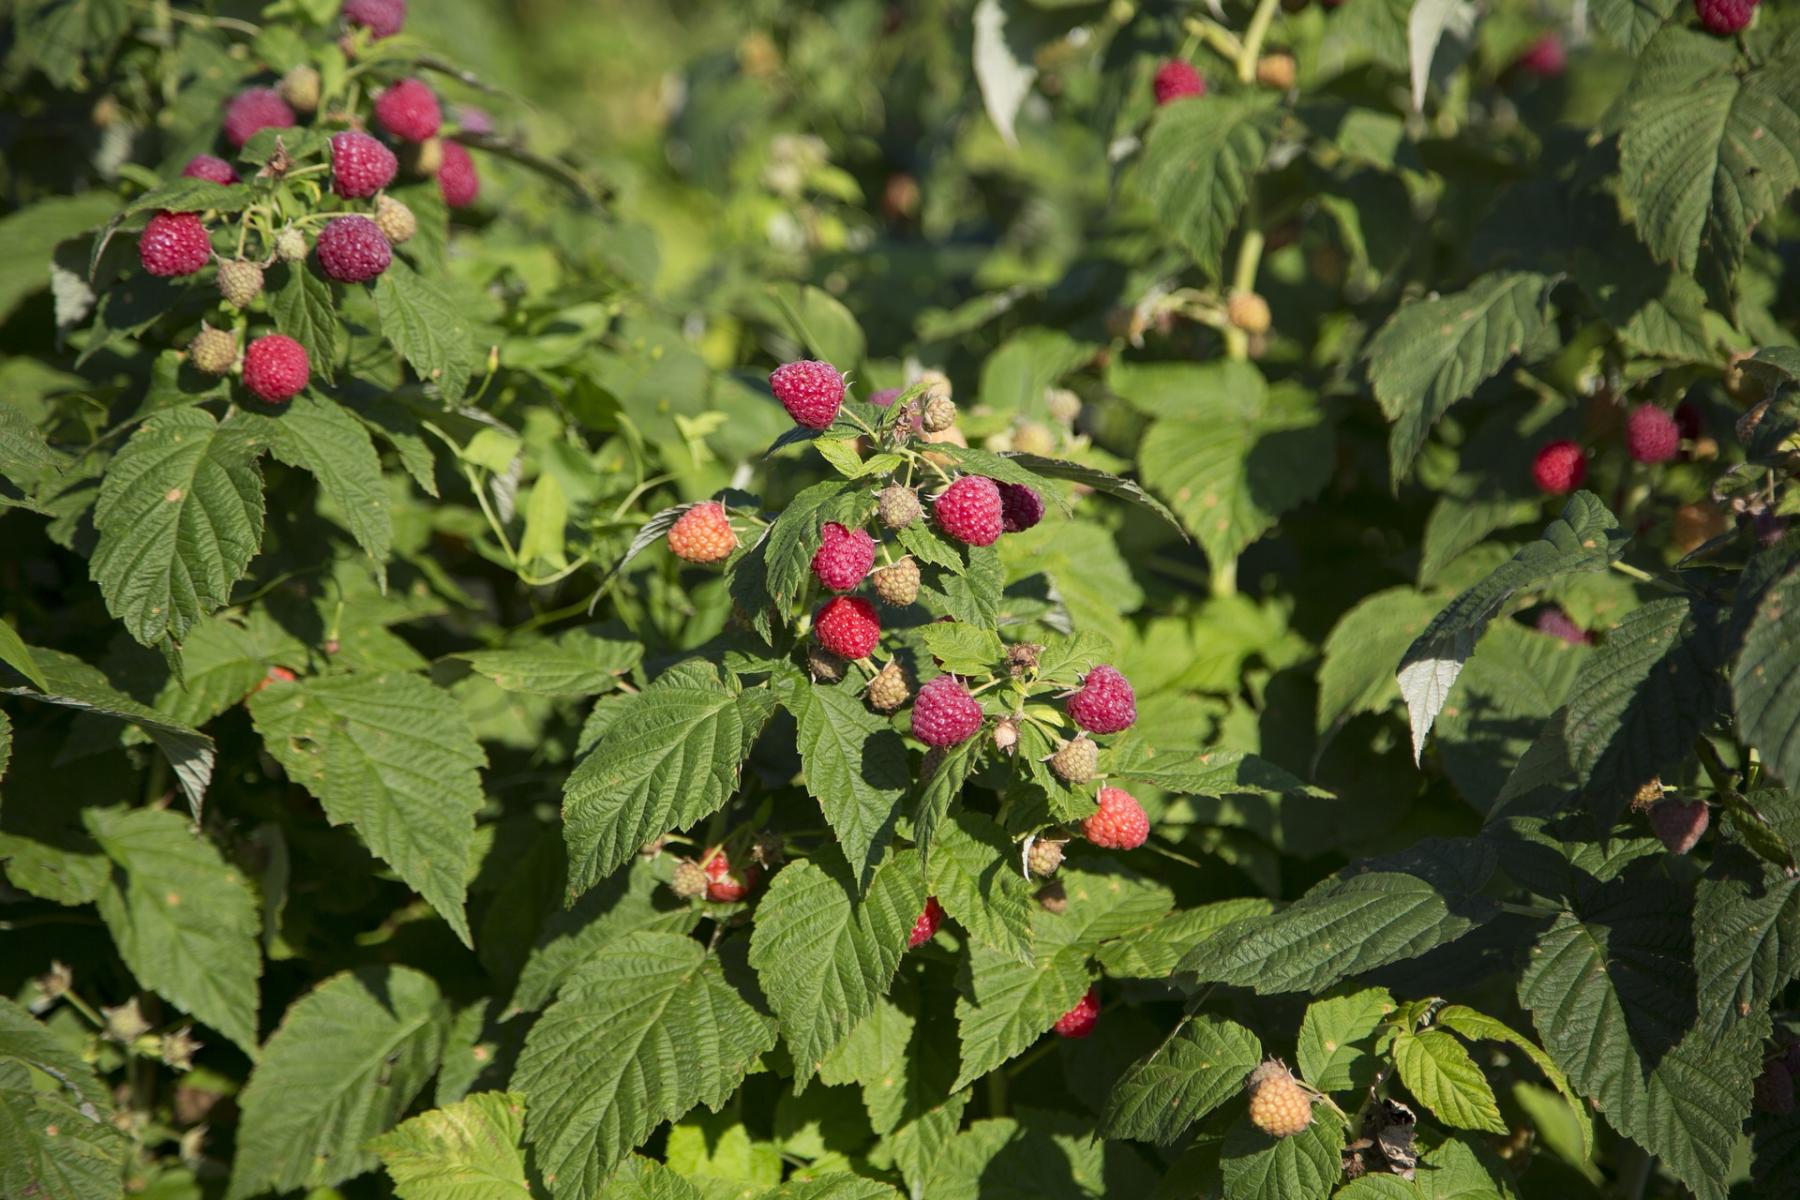 Picture of the Nature of Raspberries during growing season